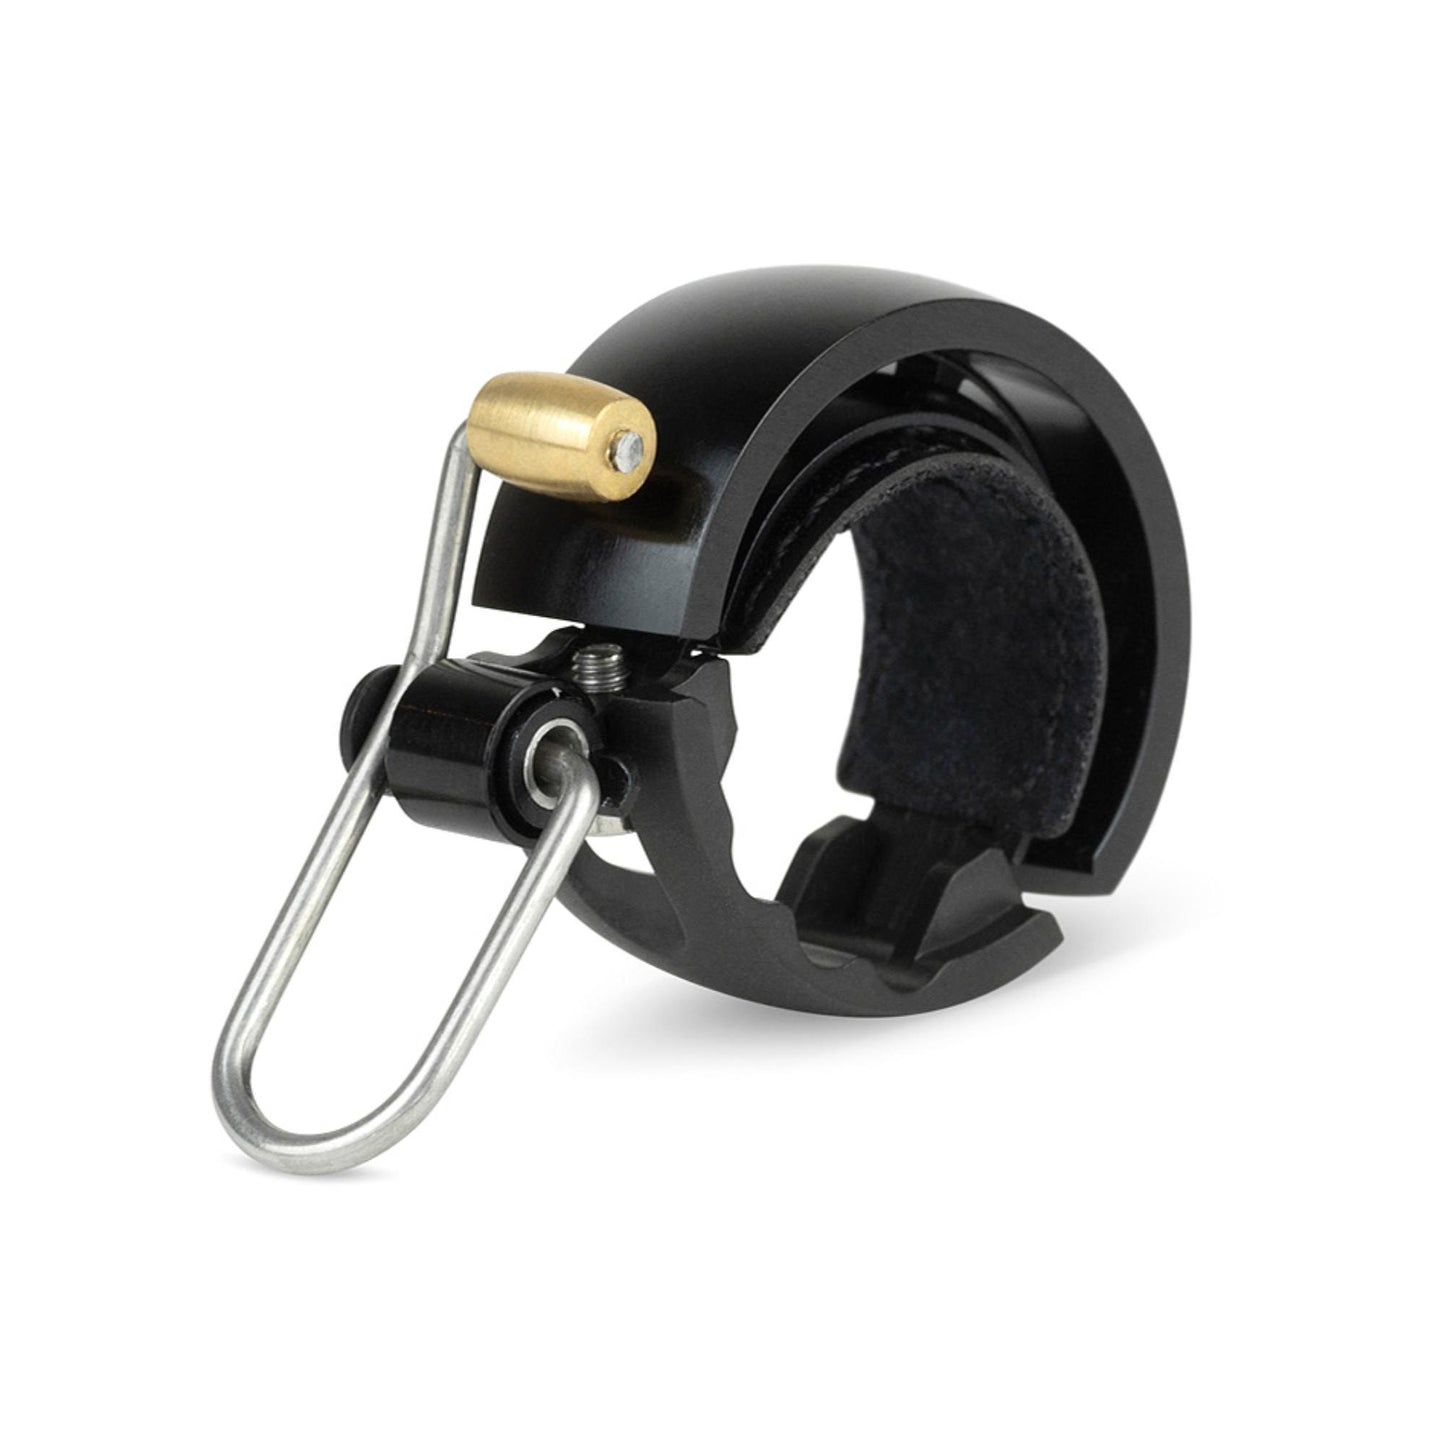 Knog Oi Luxe Bike Bell Black Small